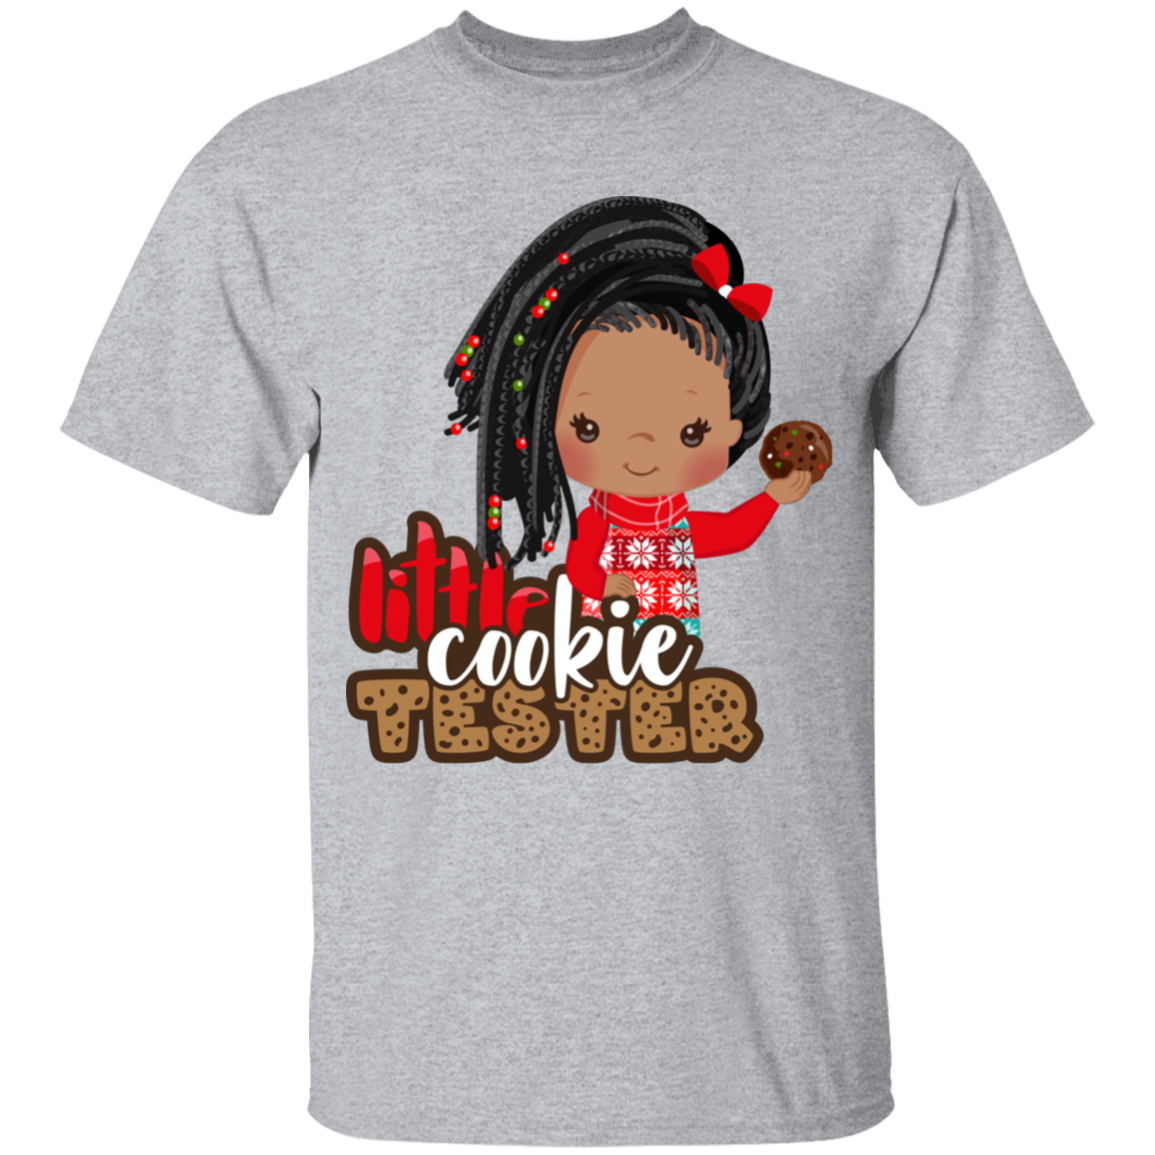 Little Cookie Tester African American Girl  Cotton T-Shirt